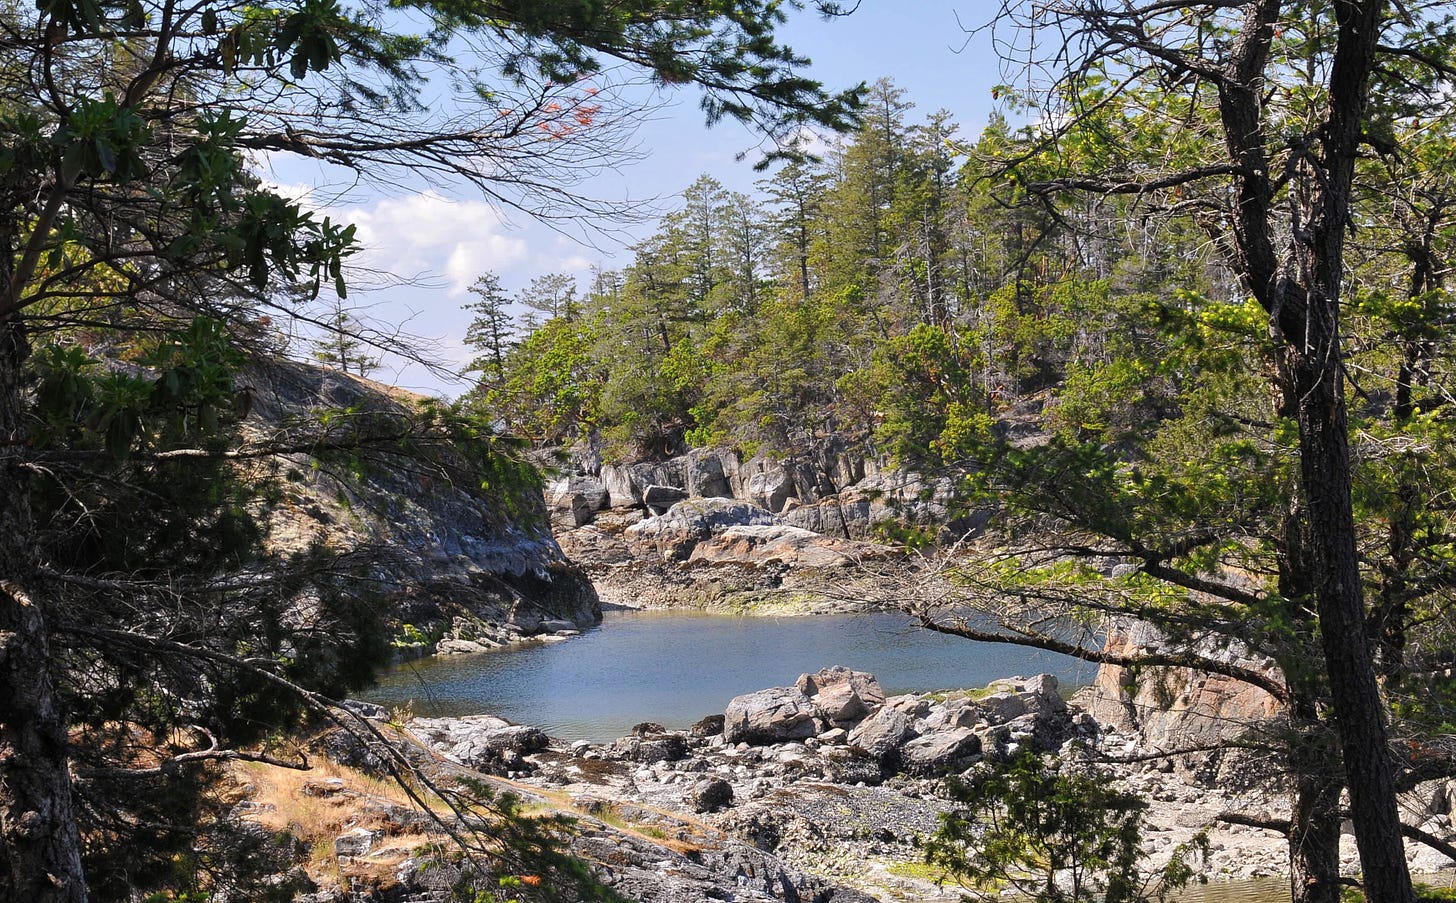 Part of Smuggler Cove